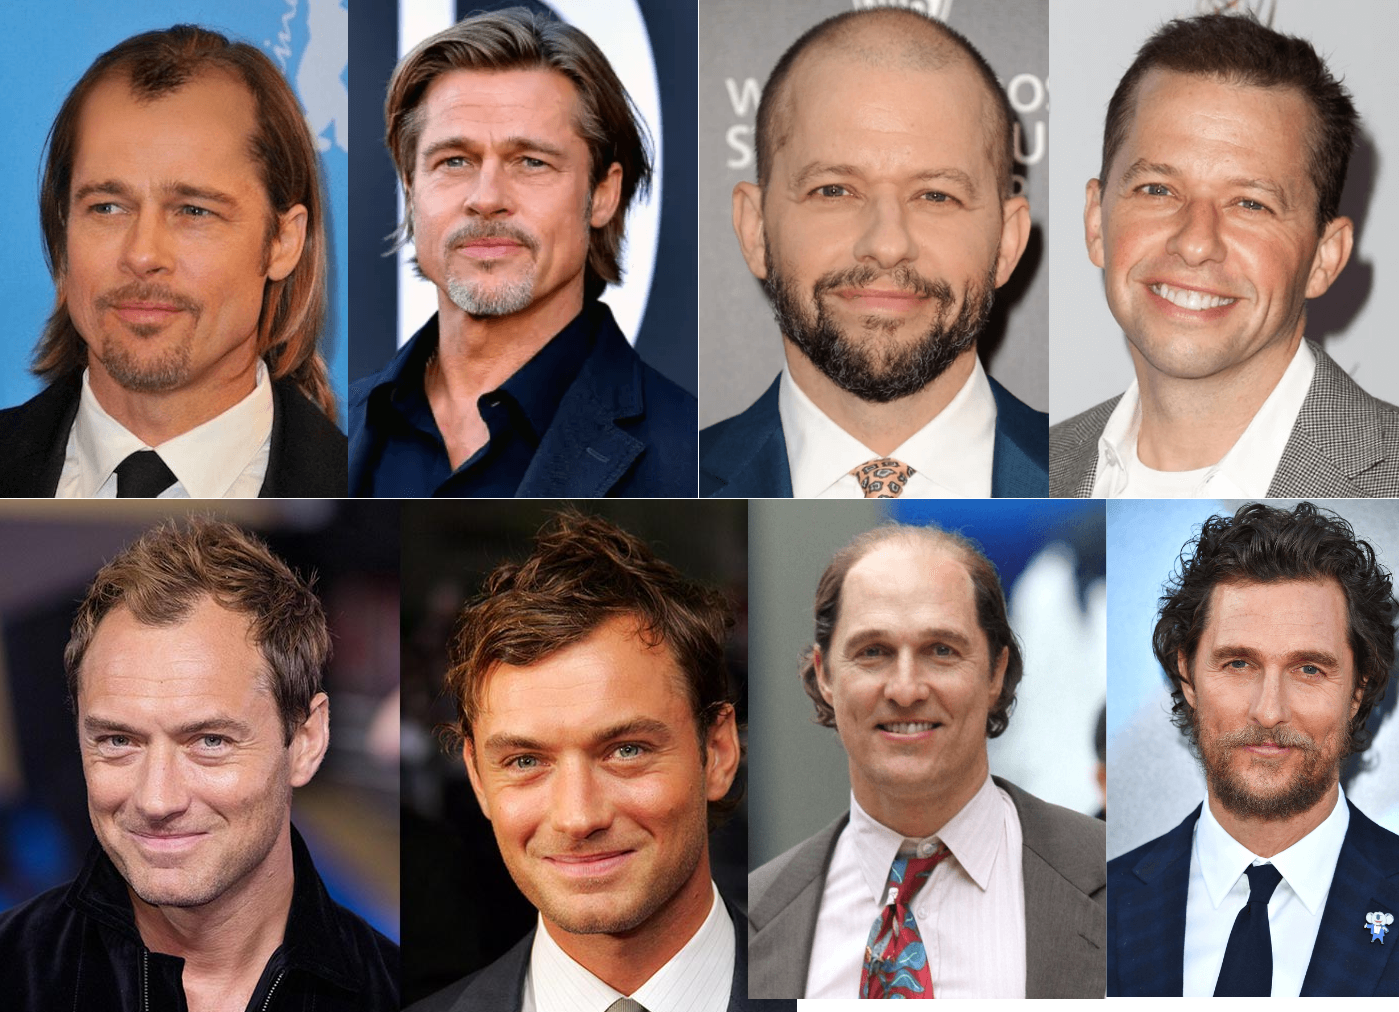 Male Celebrities in Custom Hair Systems, Toupees, and Men's Hair Wigs